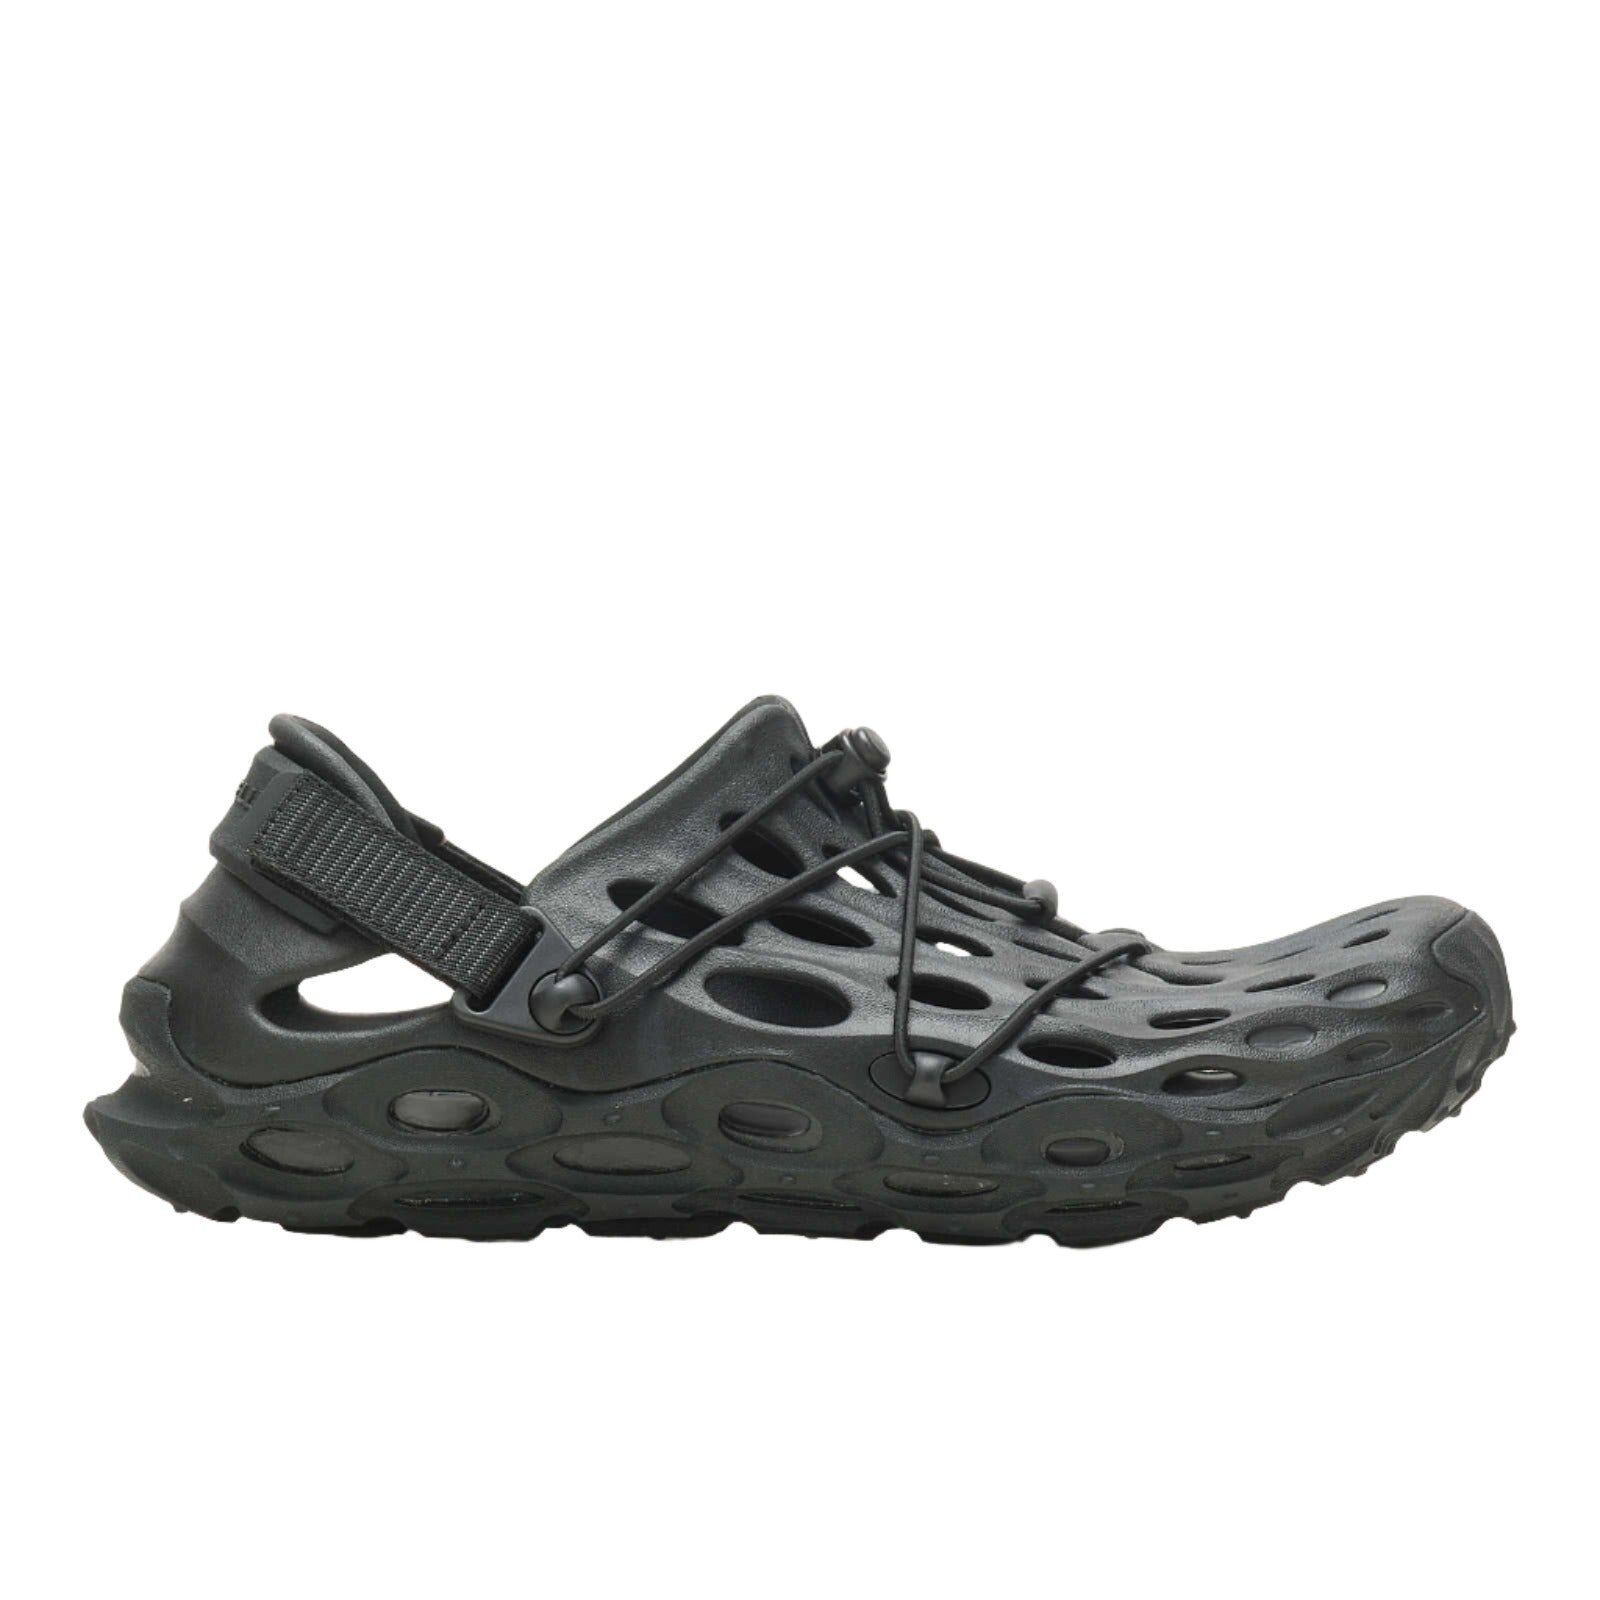 Merrell Women's Hydro Moc AT Cage 1TRL Sandals Blackout US 8 EU 38.5 